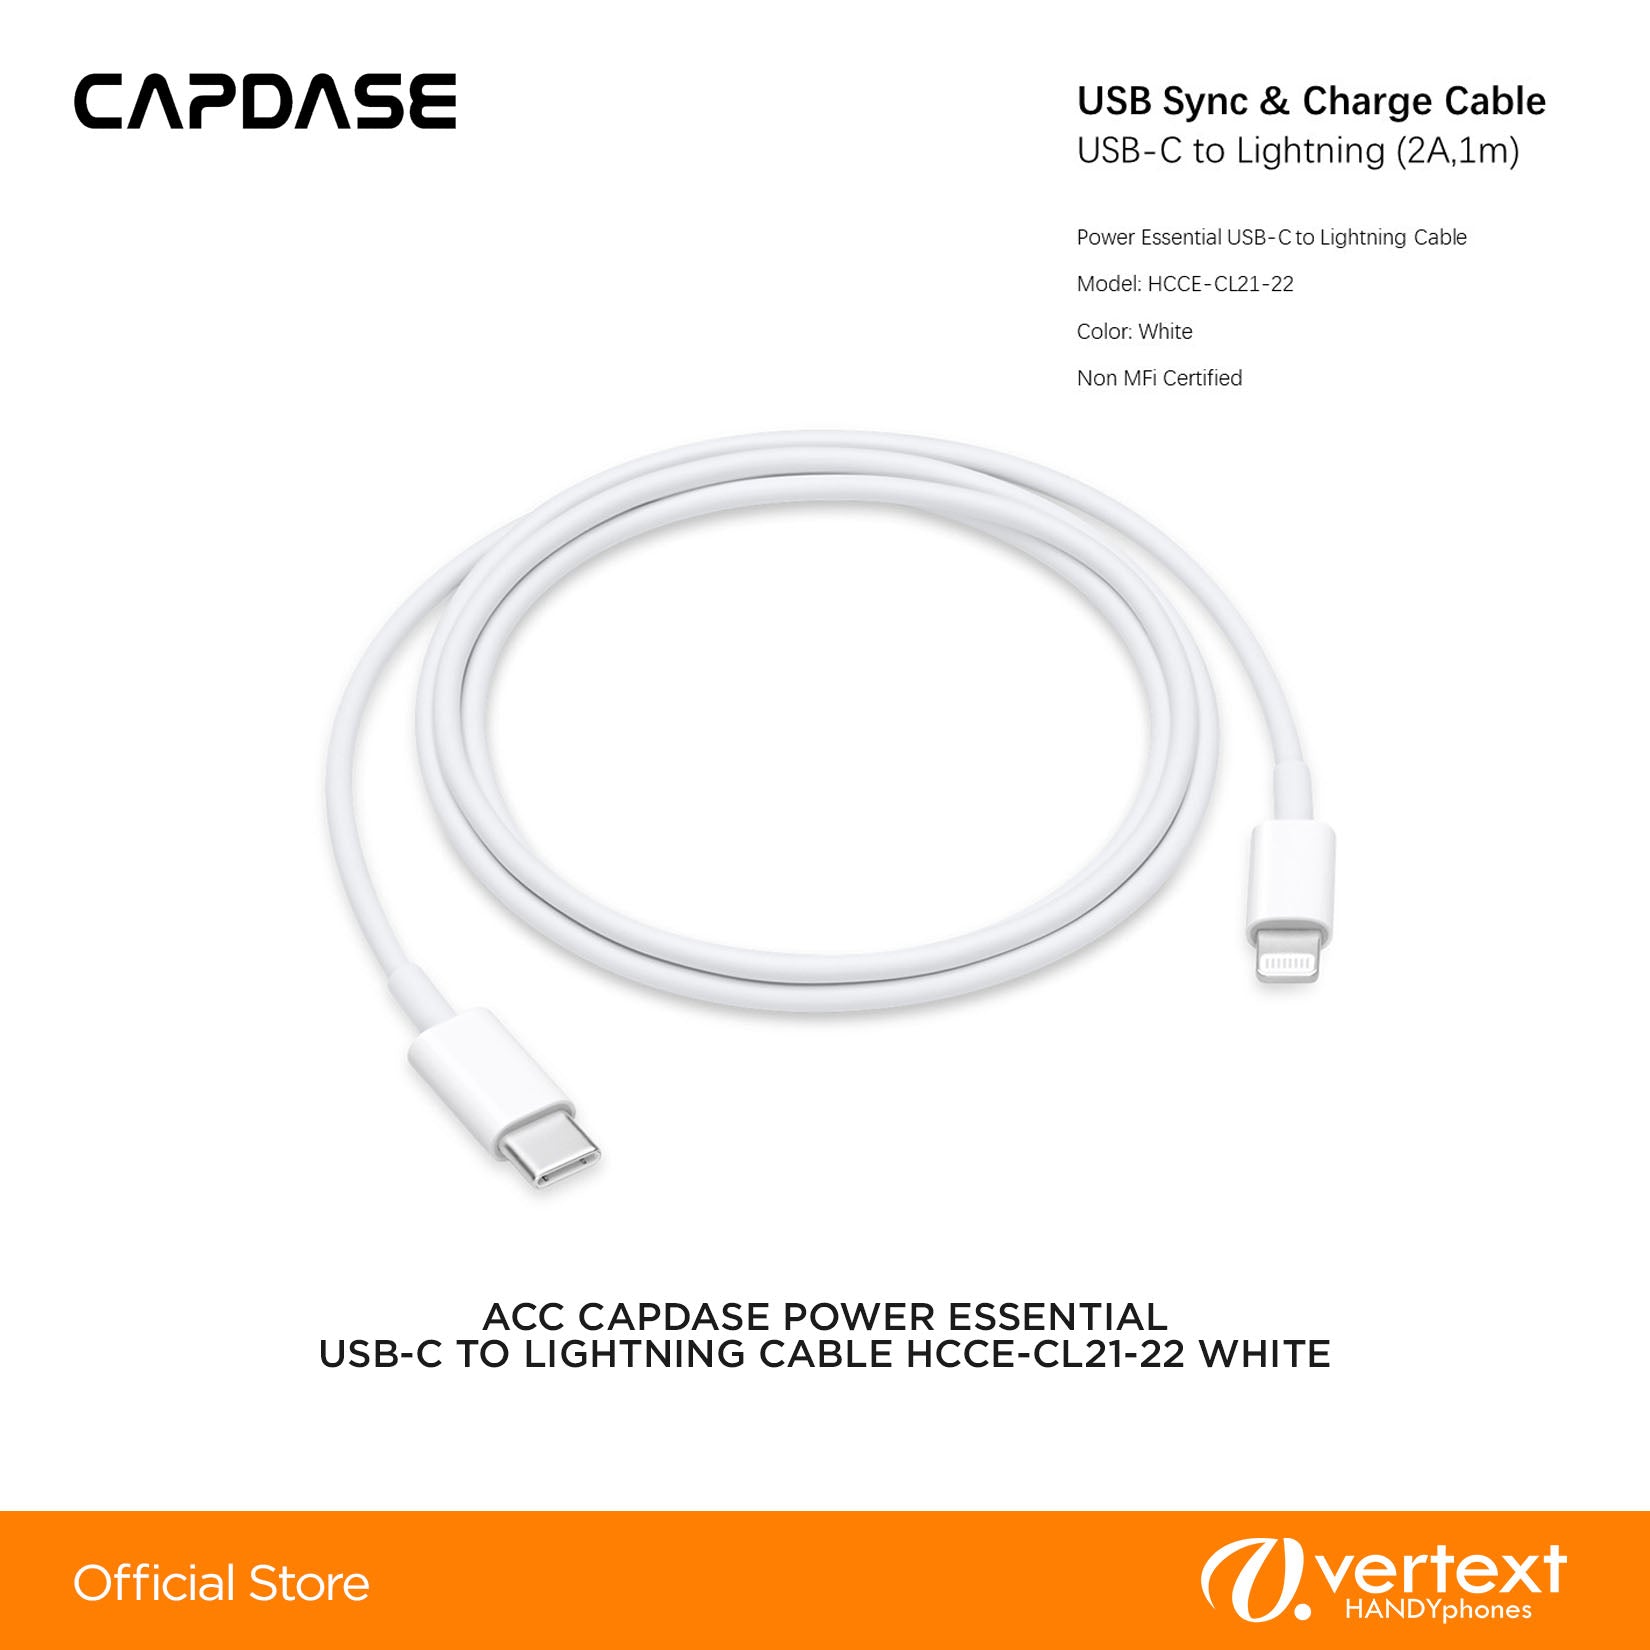 Capdase POWER ESSENTIAL USB-C TO LIGHTNING CABLE HCCE-CL21-22